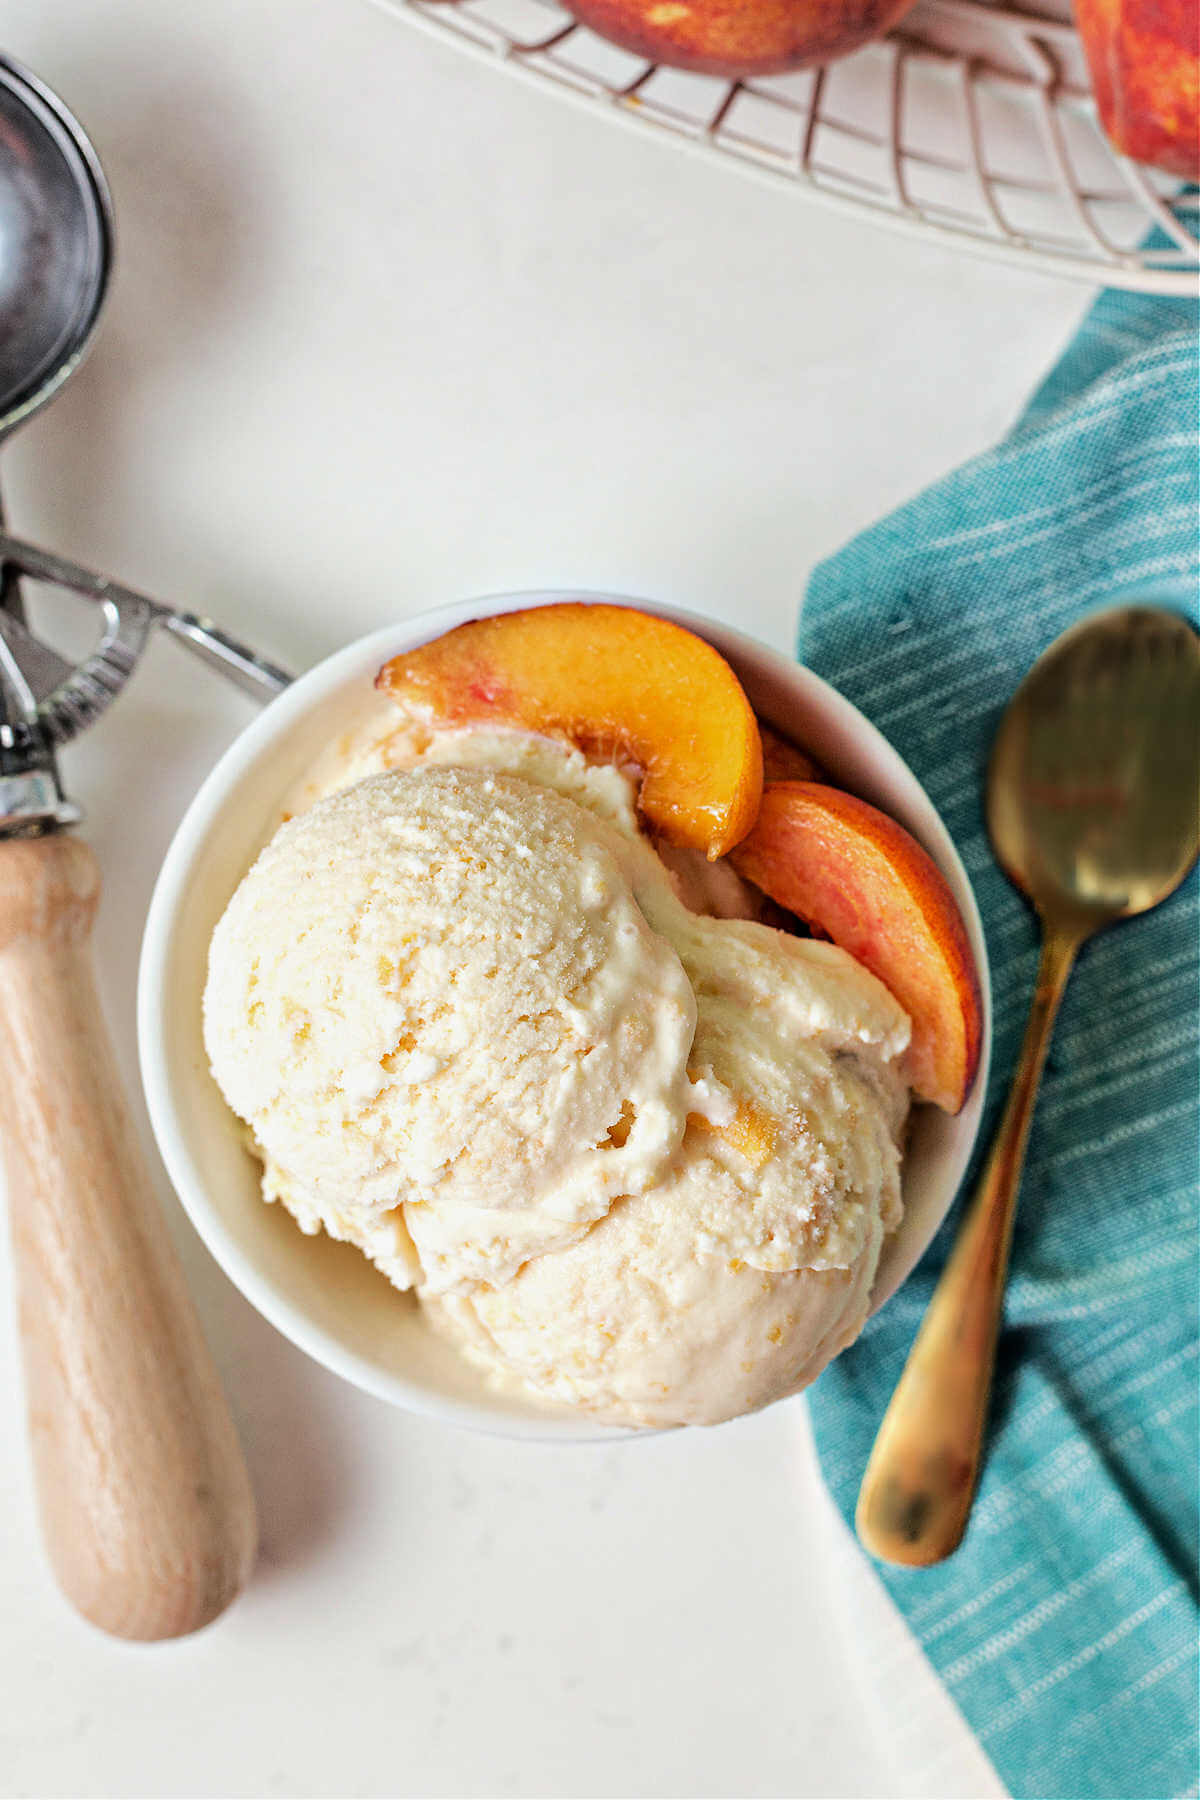 a bowl of peach ice cream with peach slices on the side.